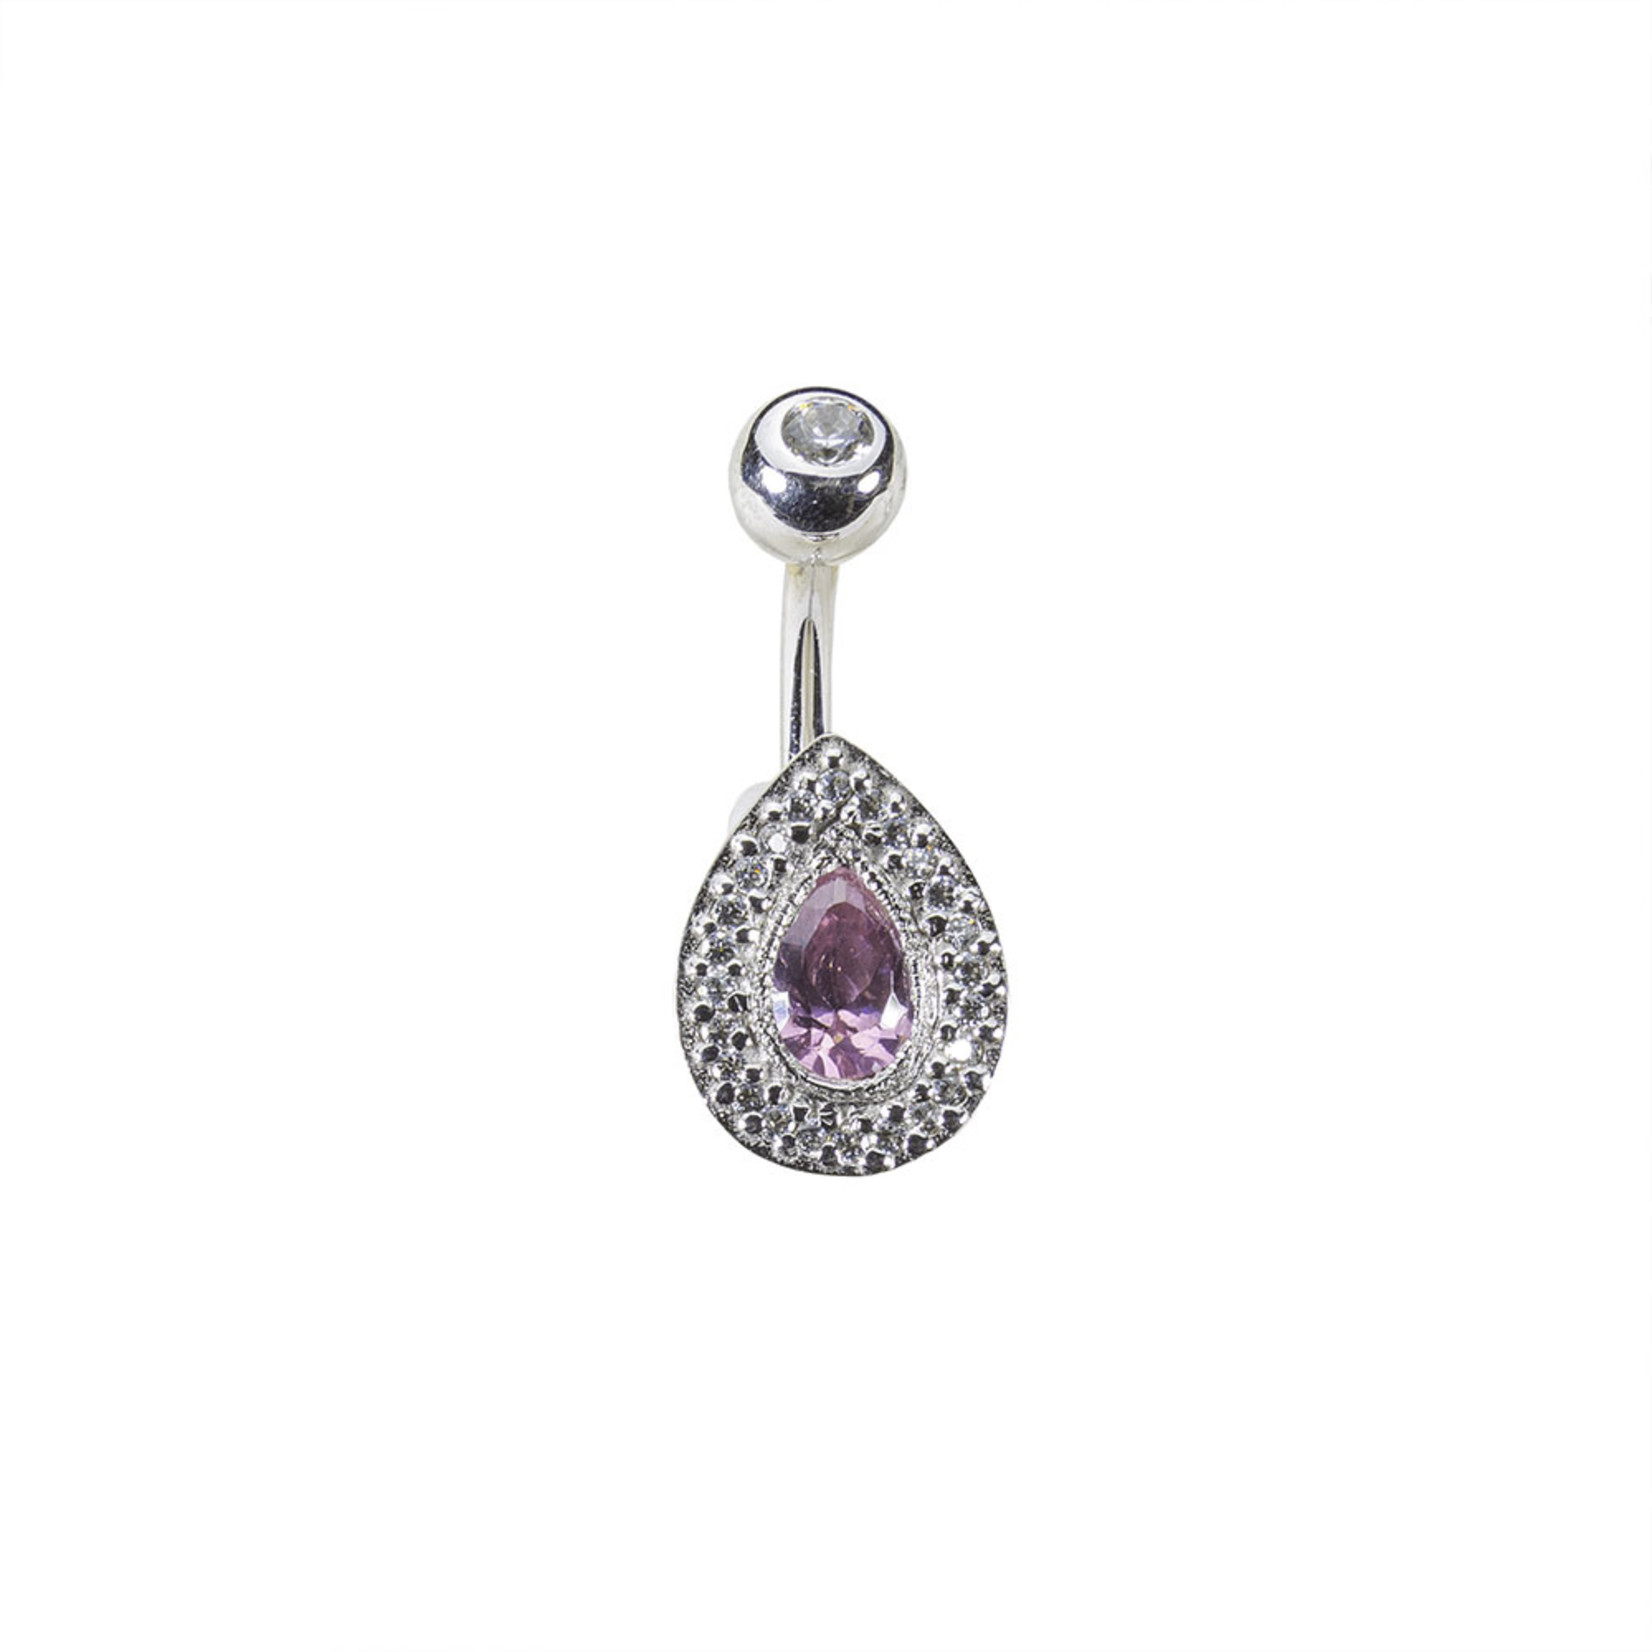 BVLA BVLA 14g 3/8 white gold j curve with pear cut pink CZ surrounded by CZ